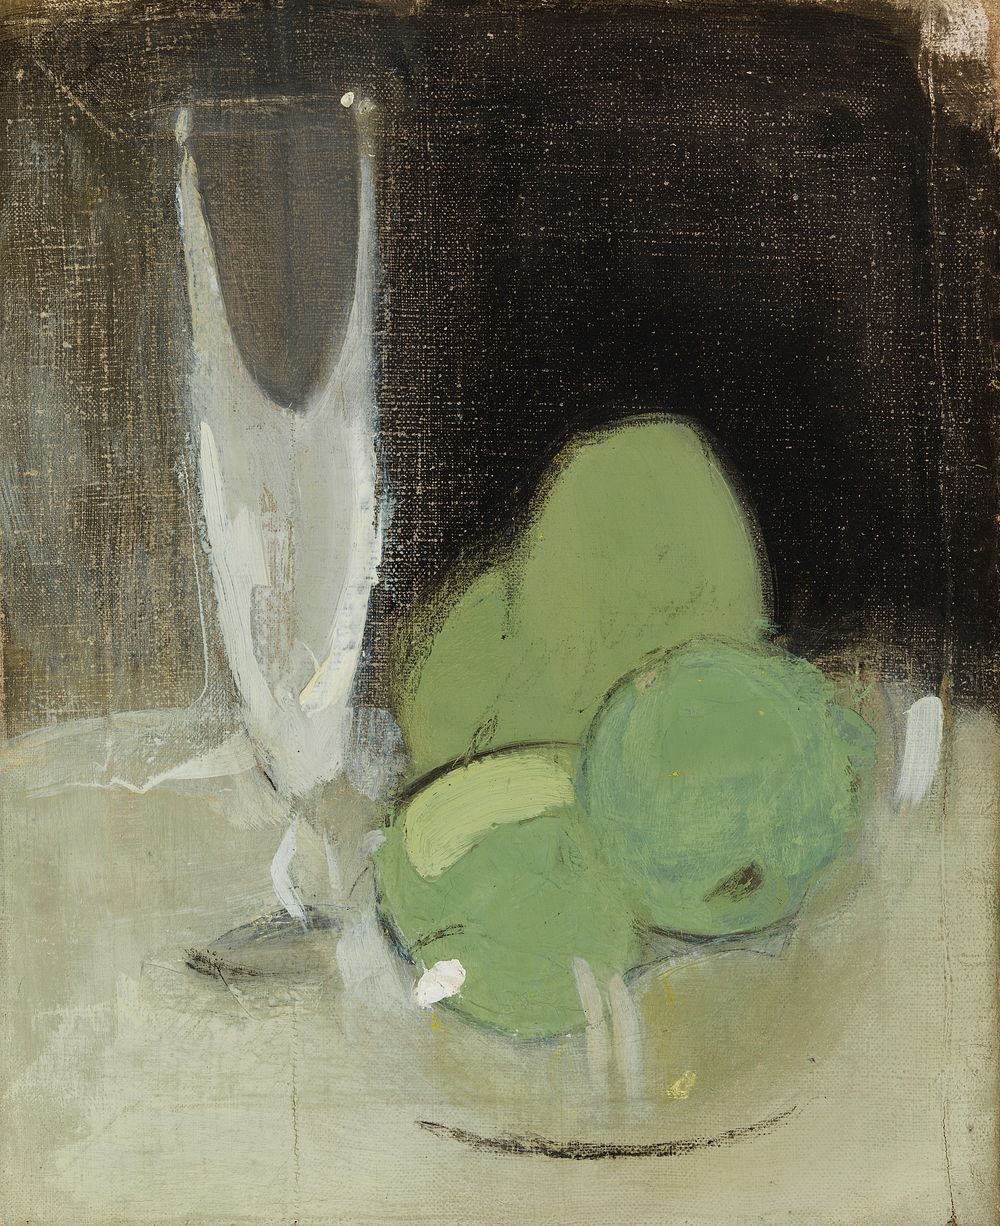 Green apples and champagne glass, 1934, Helene Schjerfbeck